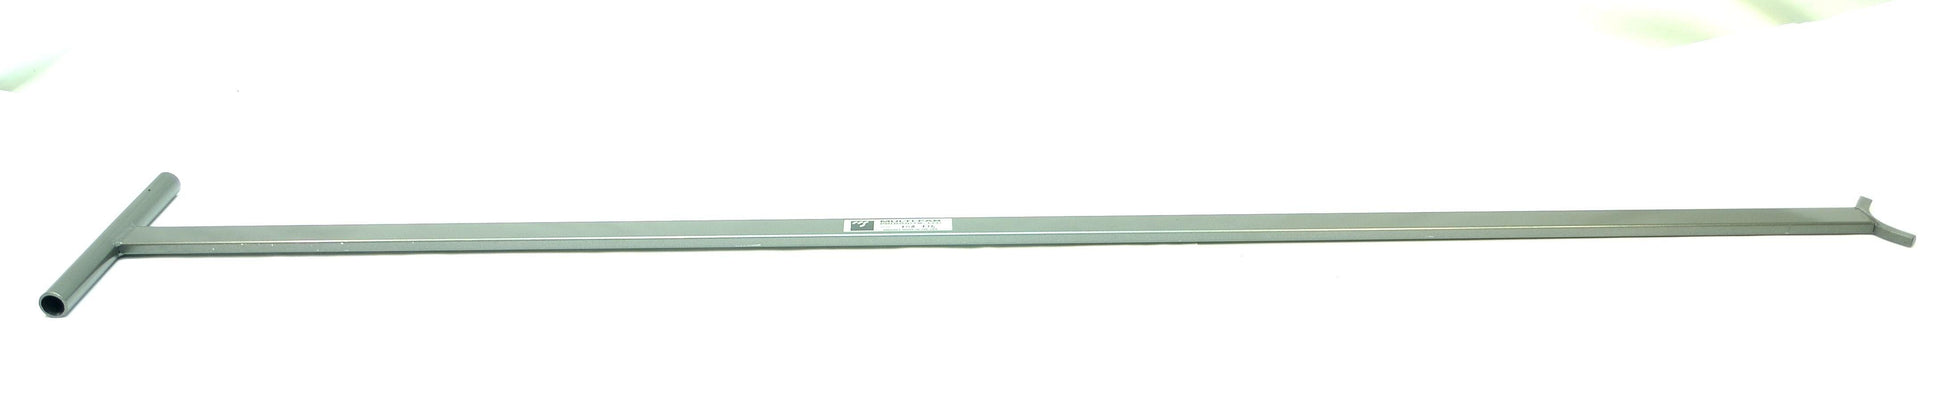 708-736 Operating Handle Push Bar Used On Star 1 and 2 Series - Kelley